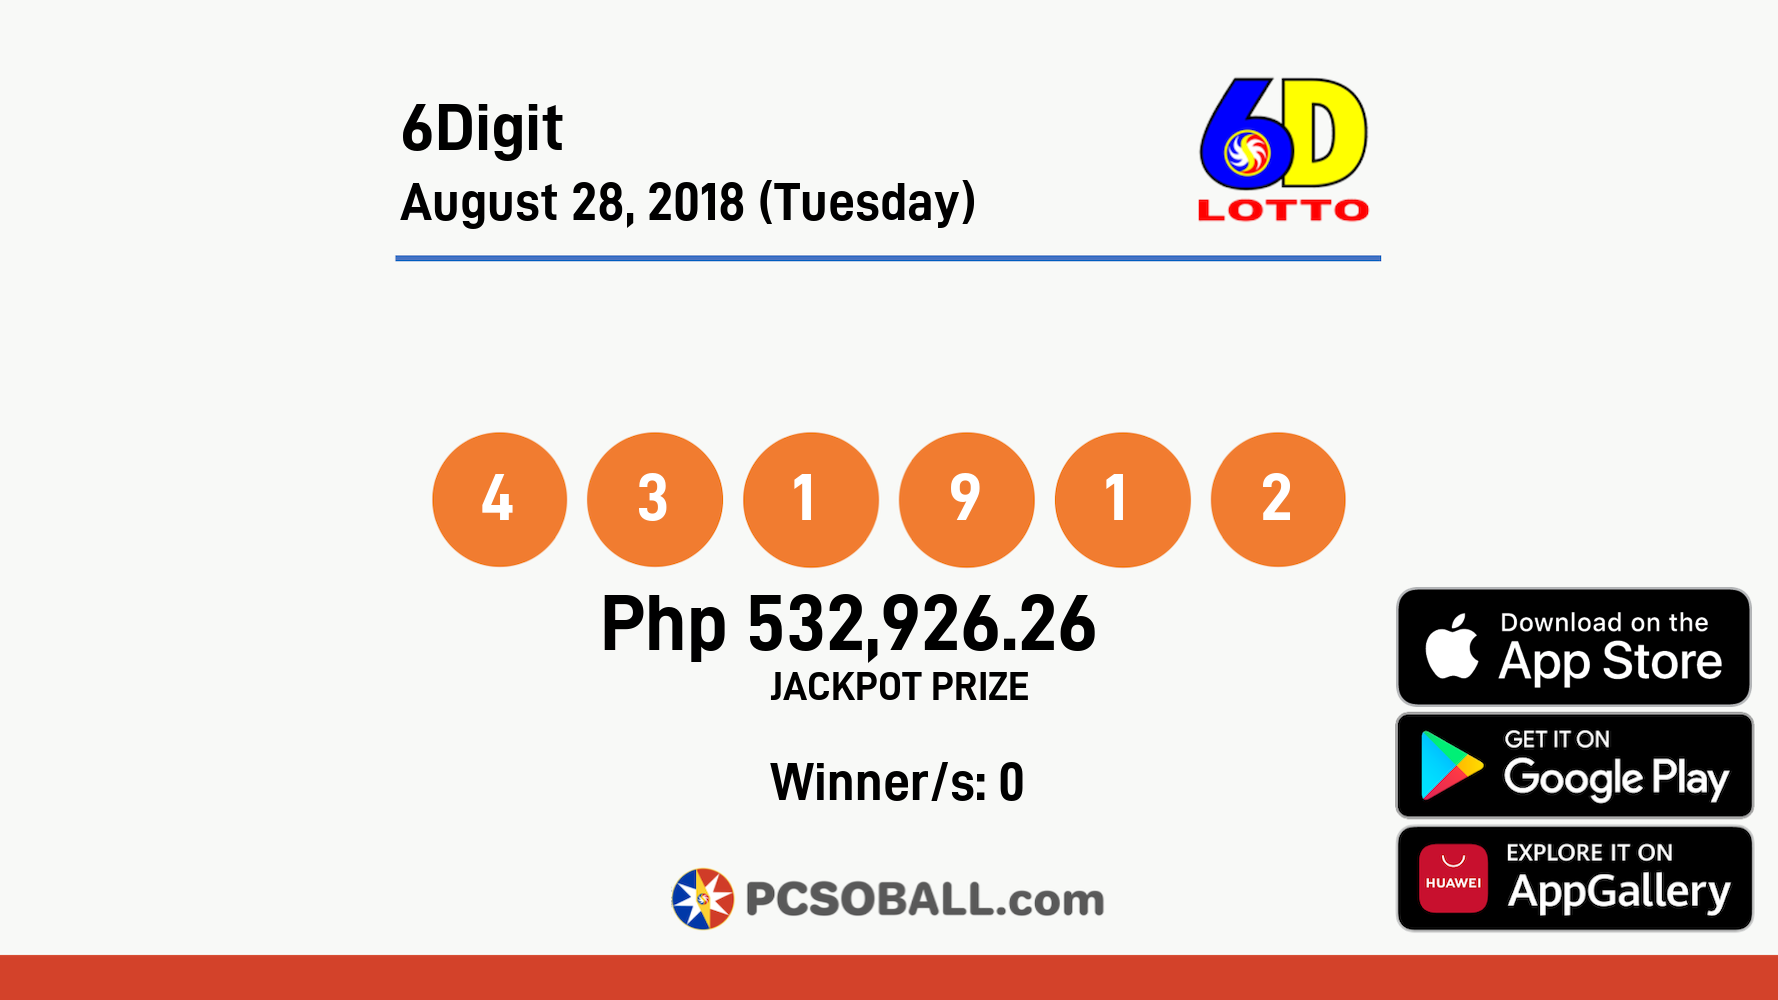 6Digit August 28, 2018 (Tuesday) Result